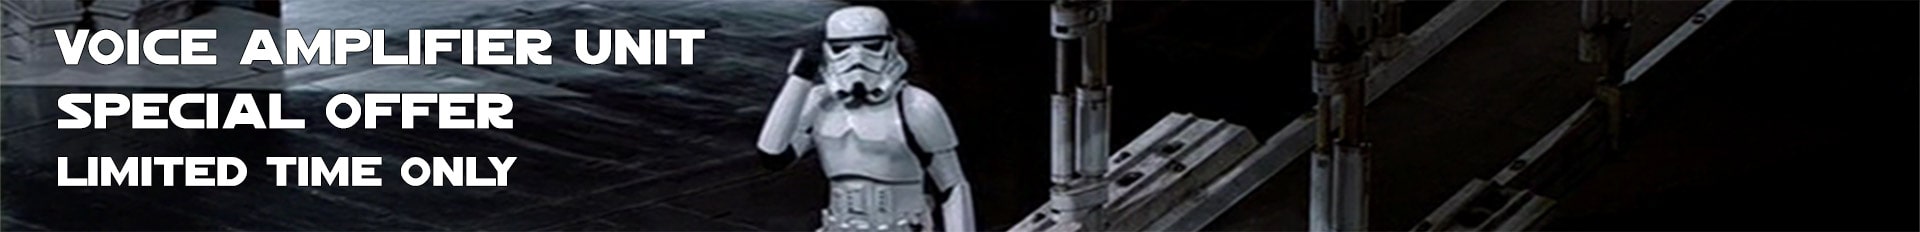 Stormtrooper Amp Unit Only �49.99